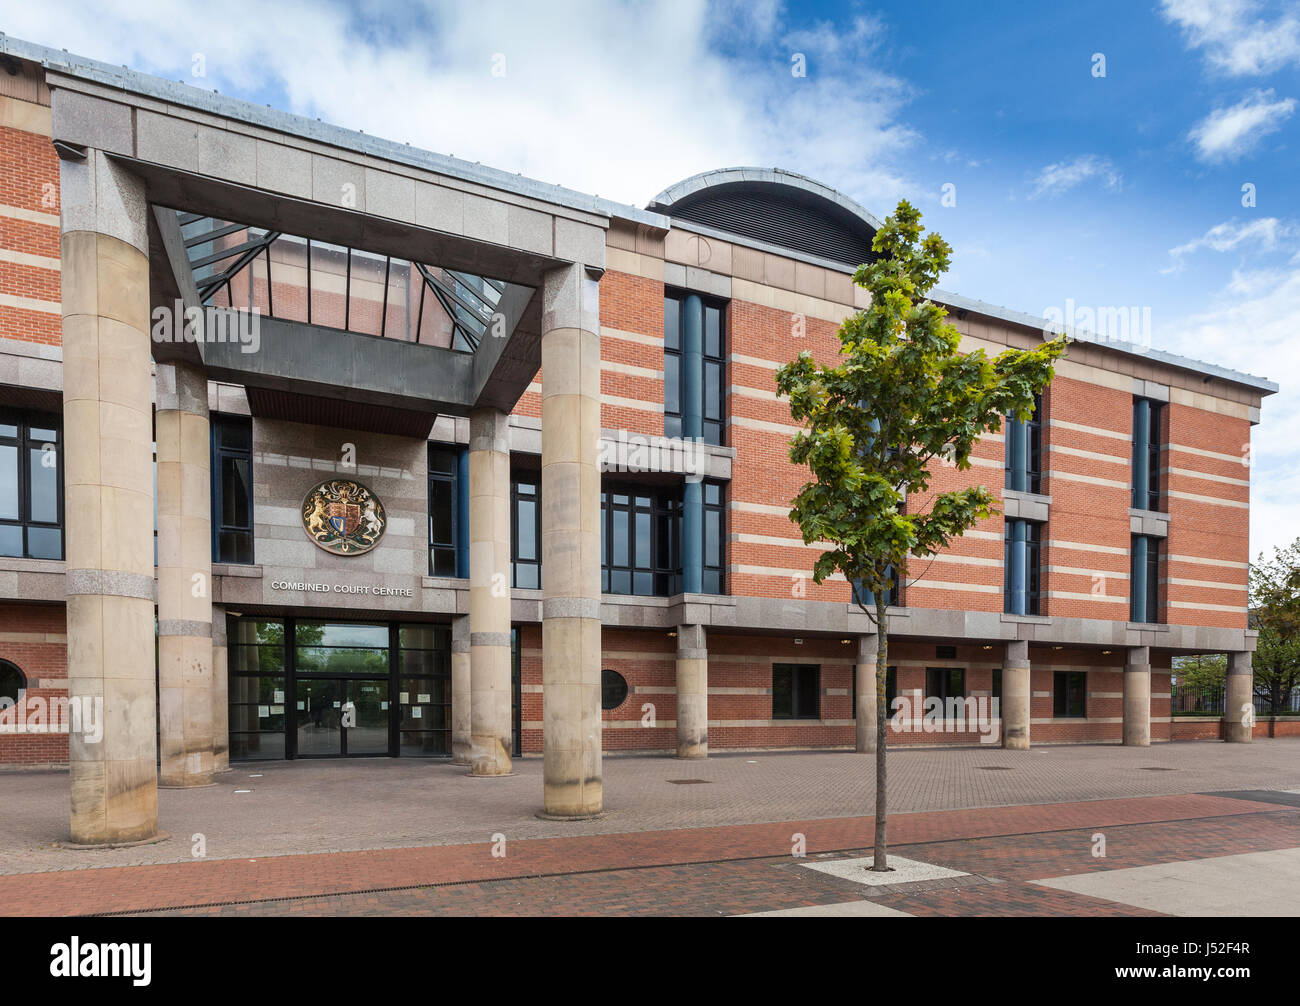 Teesside Crown Court Middlesbrough Stockfoto